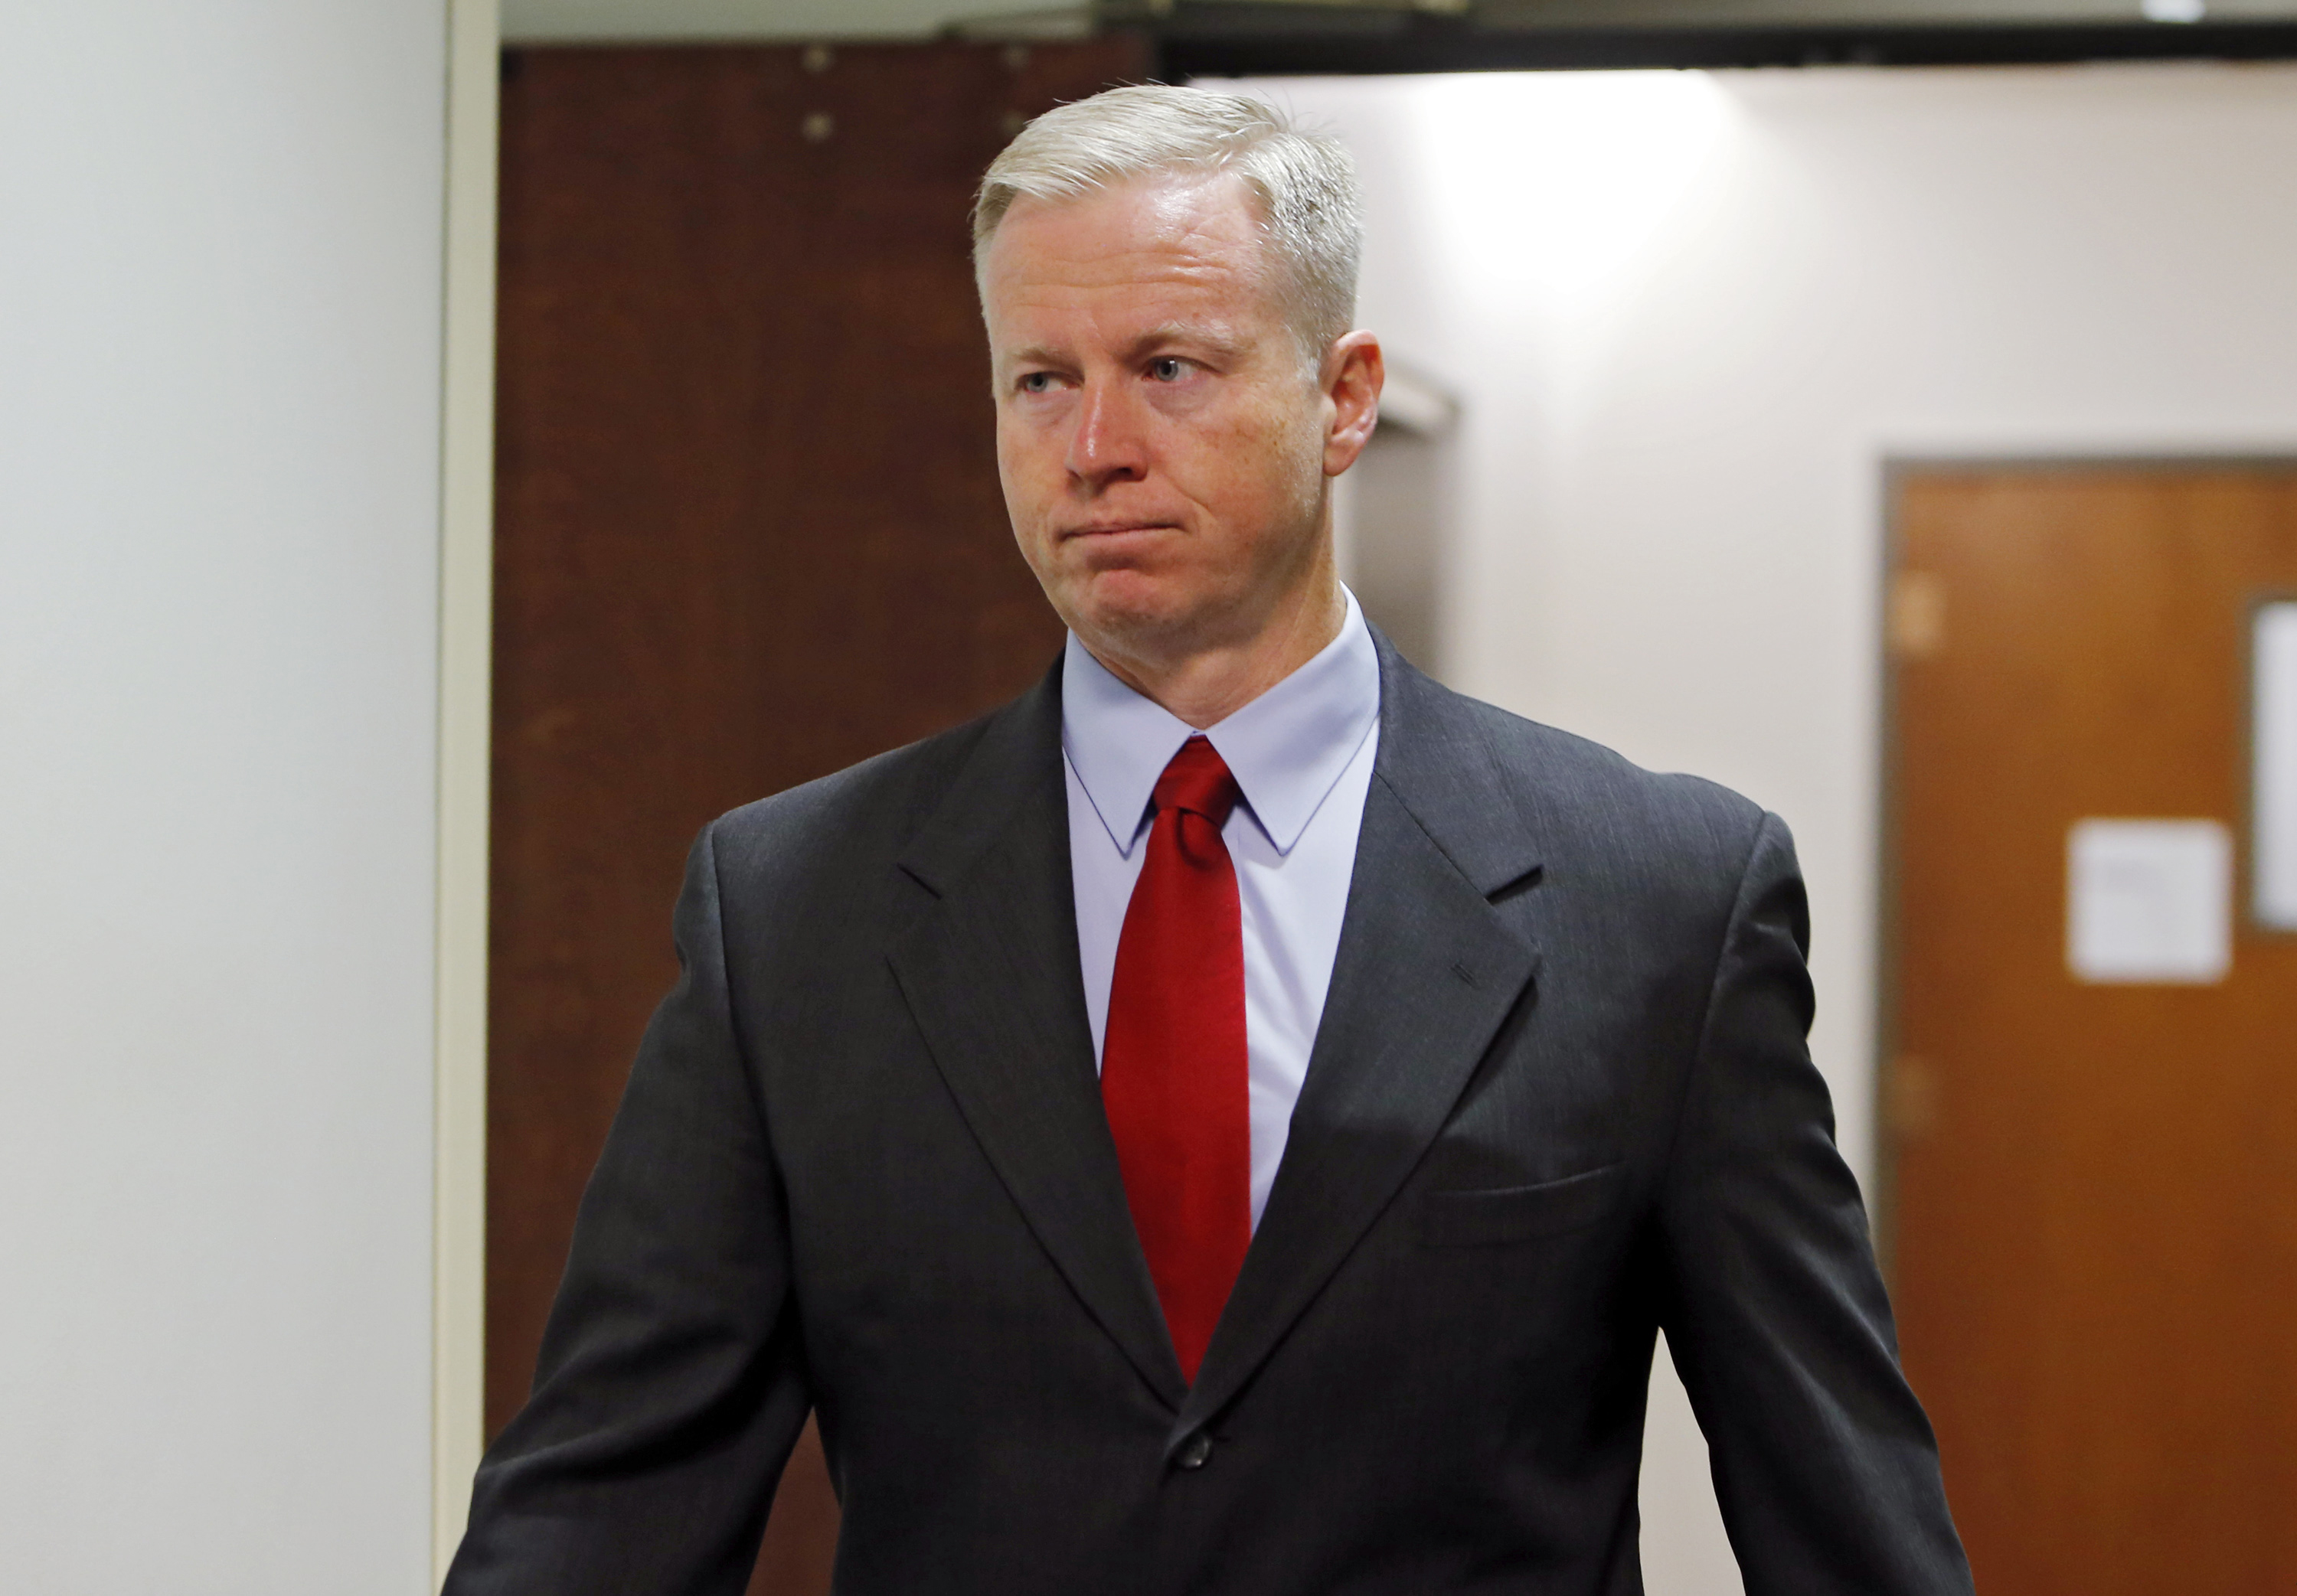 18th Judicial District Attorney George Brauchler arrives for a hearing for Aurora theater shooting suspect James Holmes at district court in Centennial, Colo. on Sept. 30, 2013. (Ed Andrieski—AP)